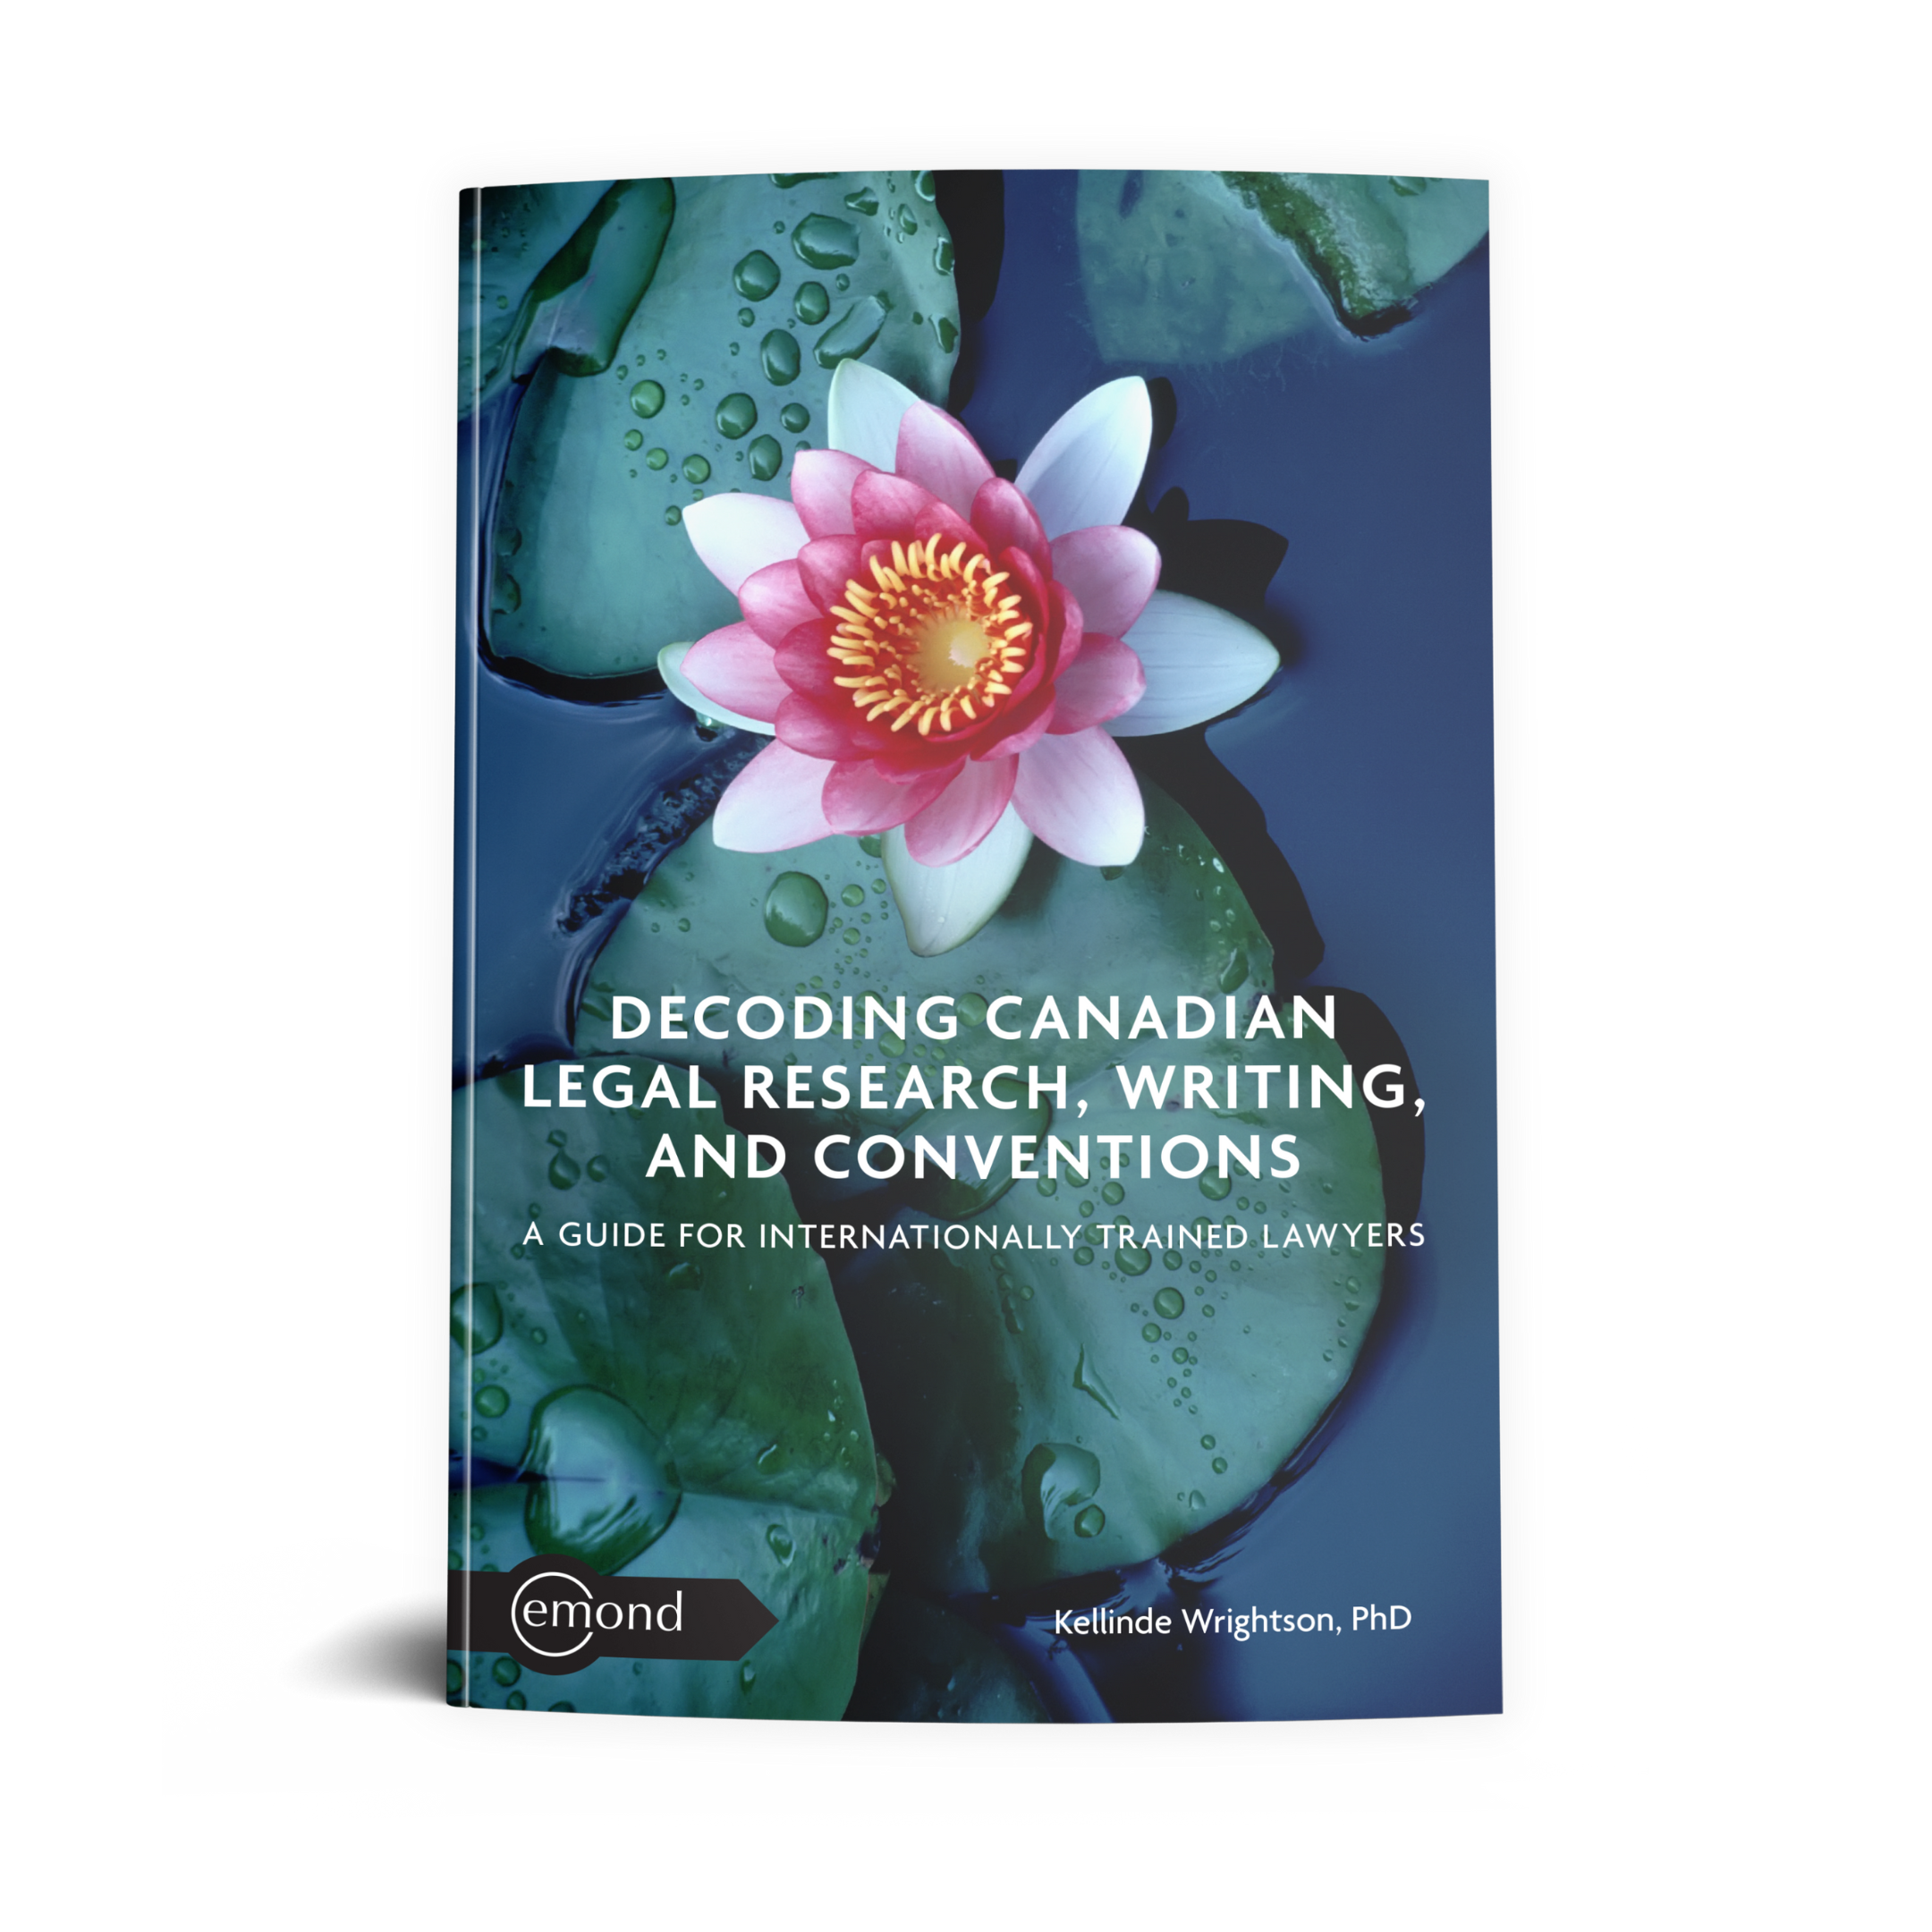 Decoding Canadian Legal Research, Writing, and Conventions: A Guide for Internationally Trained Lawyers